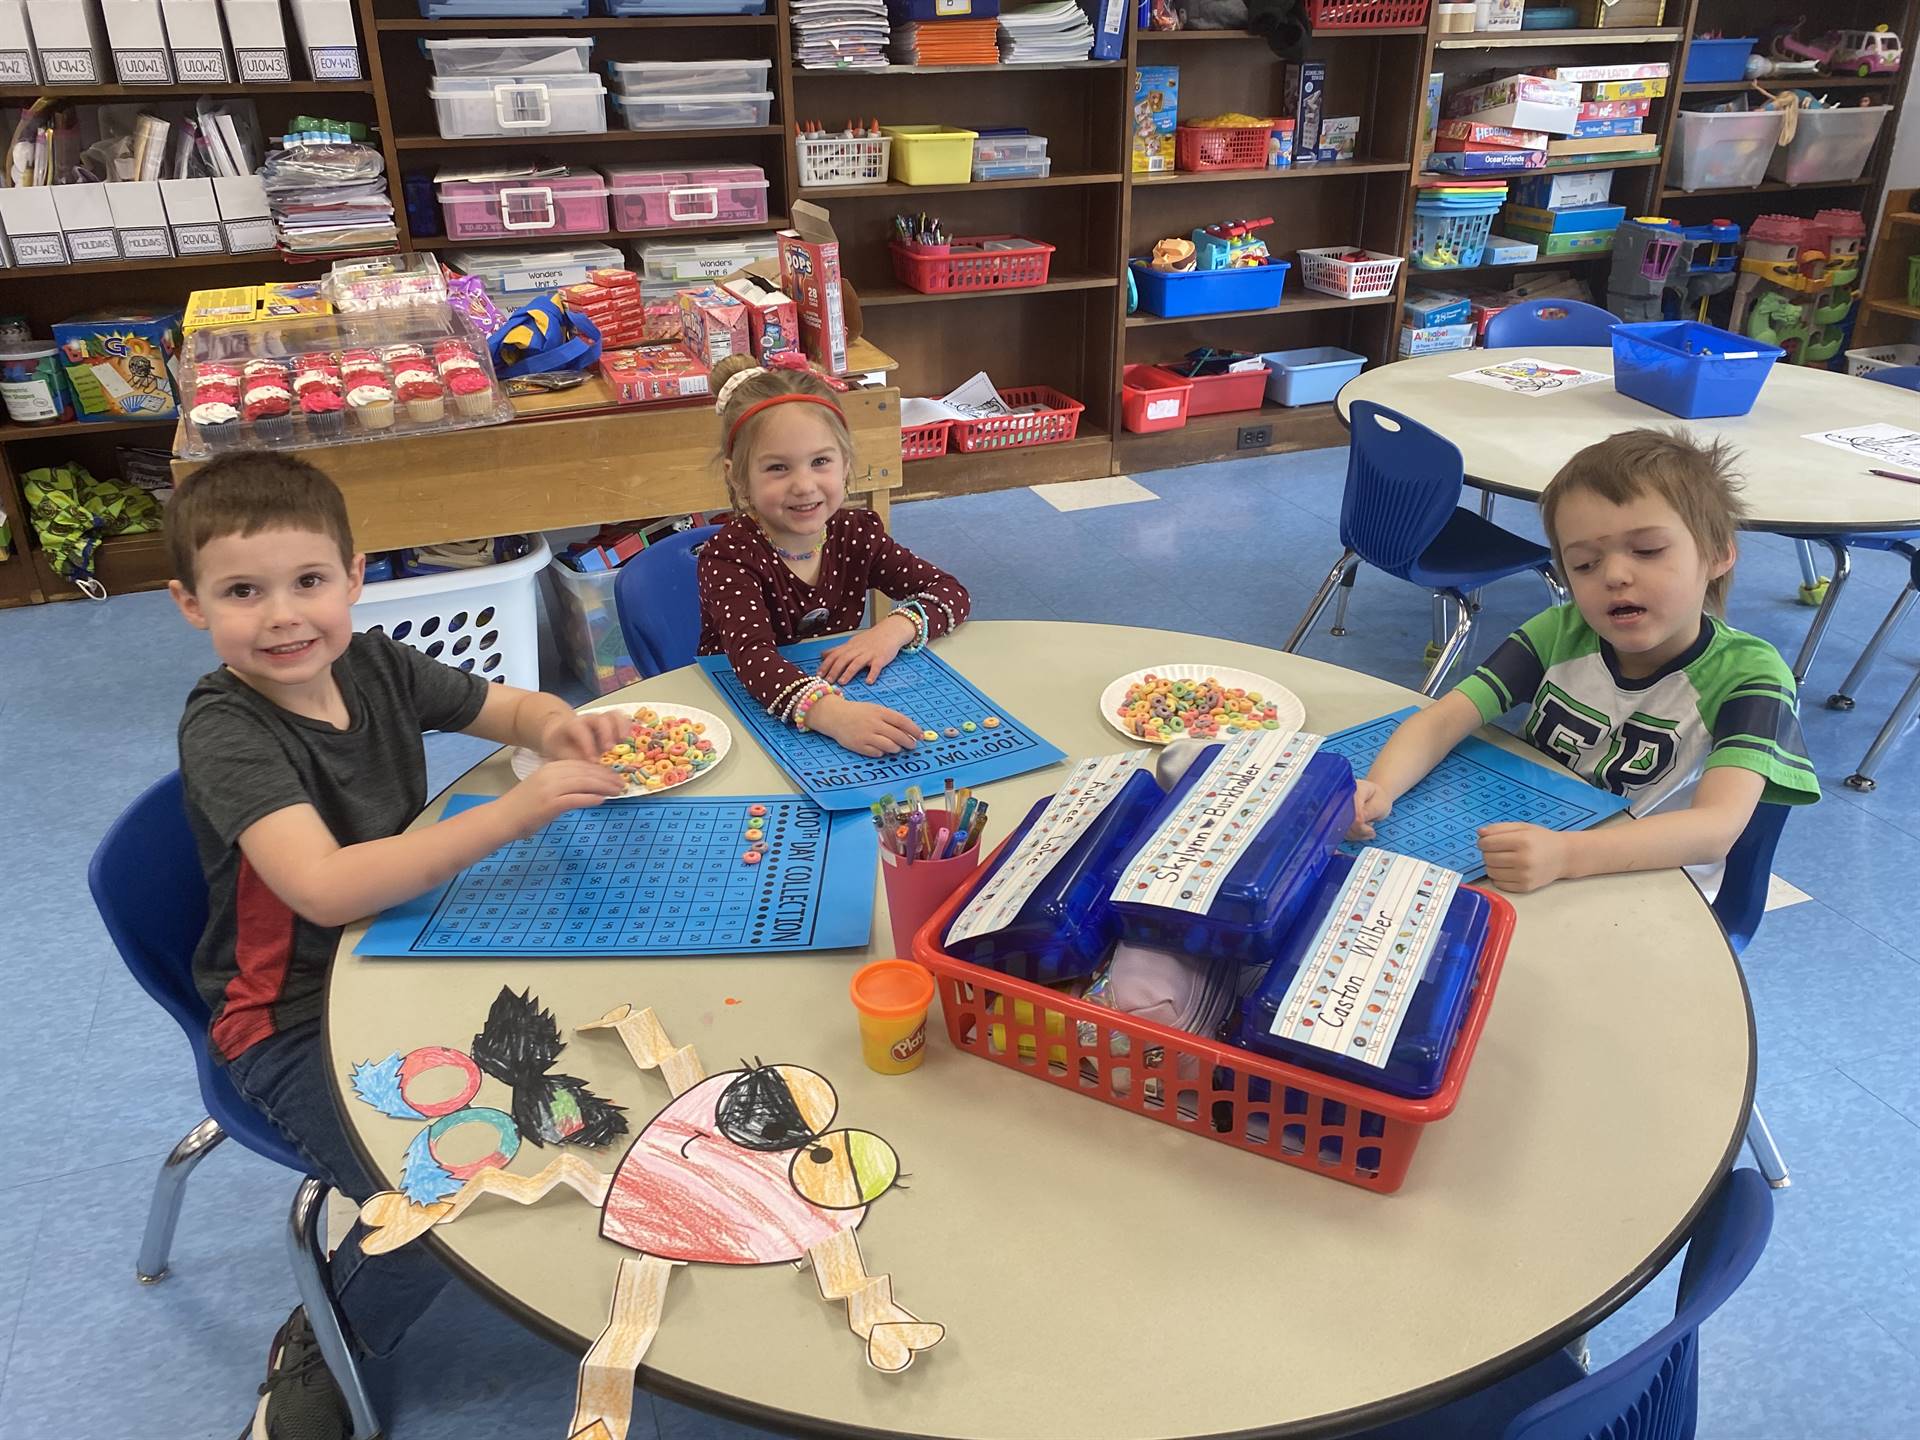 3 students counting fruit loops on a blue counting board